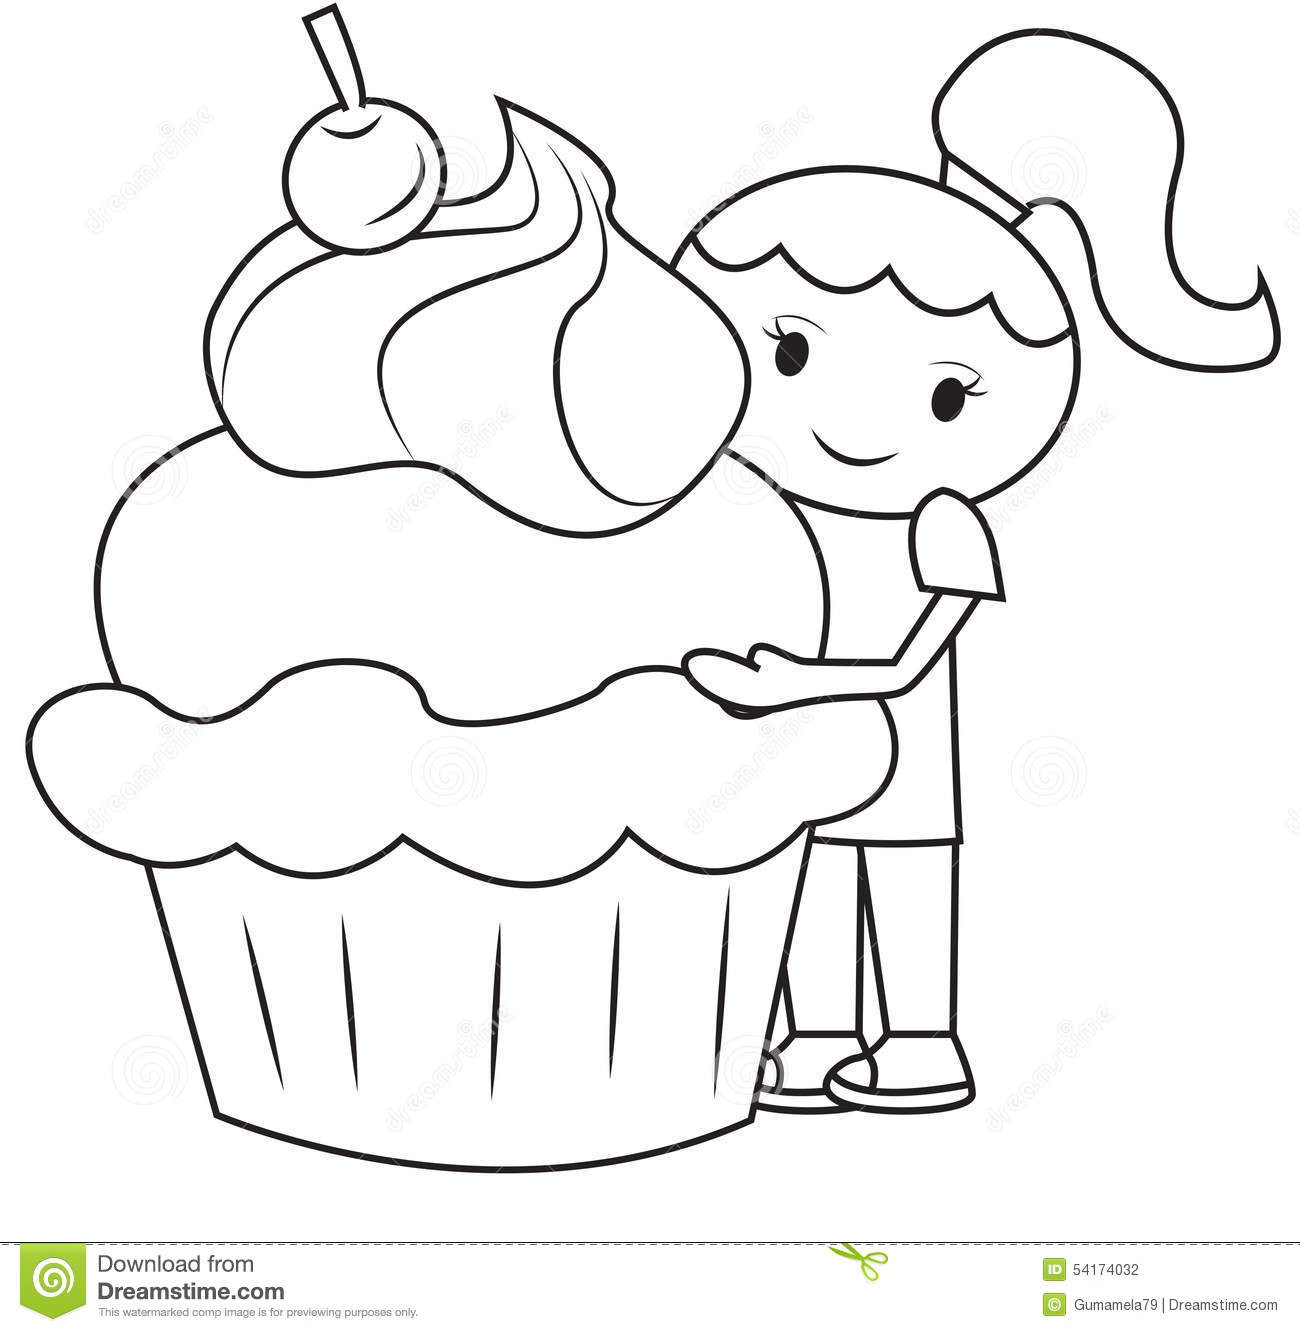 Coloring Sheets For Girls Size Big
 The Girl And The Big Cupcake Coloring Page Stock